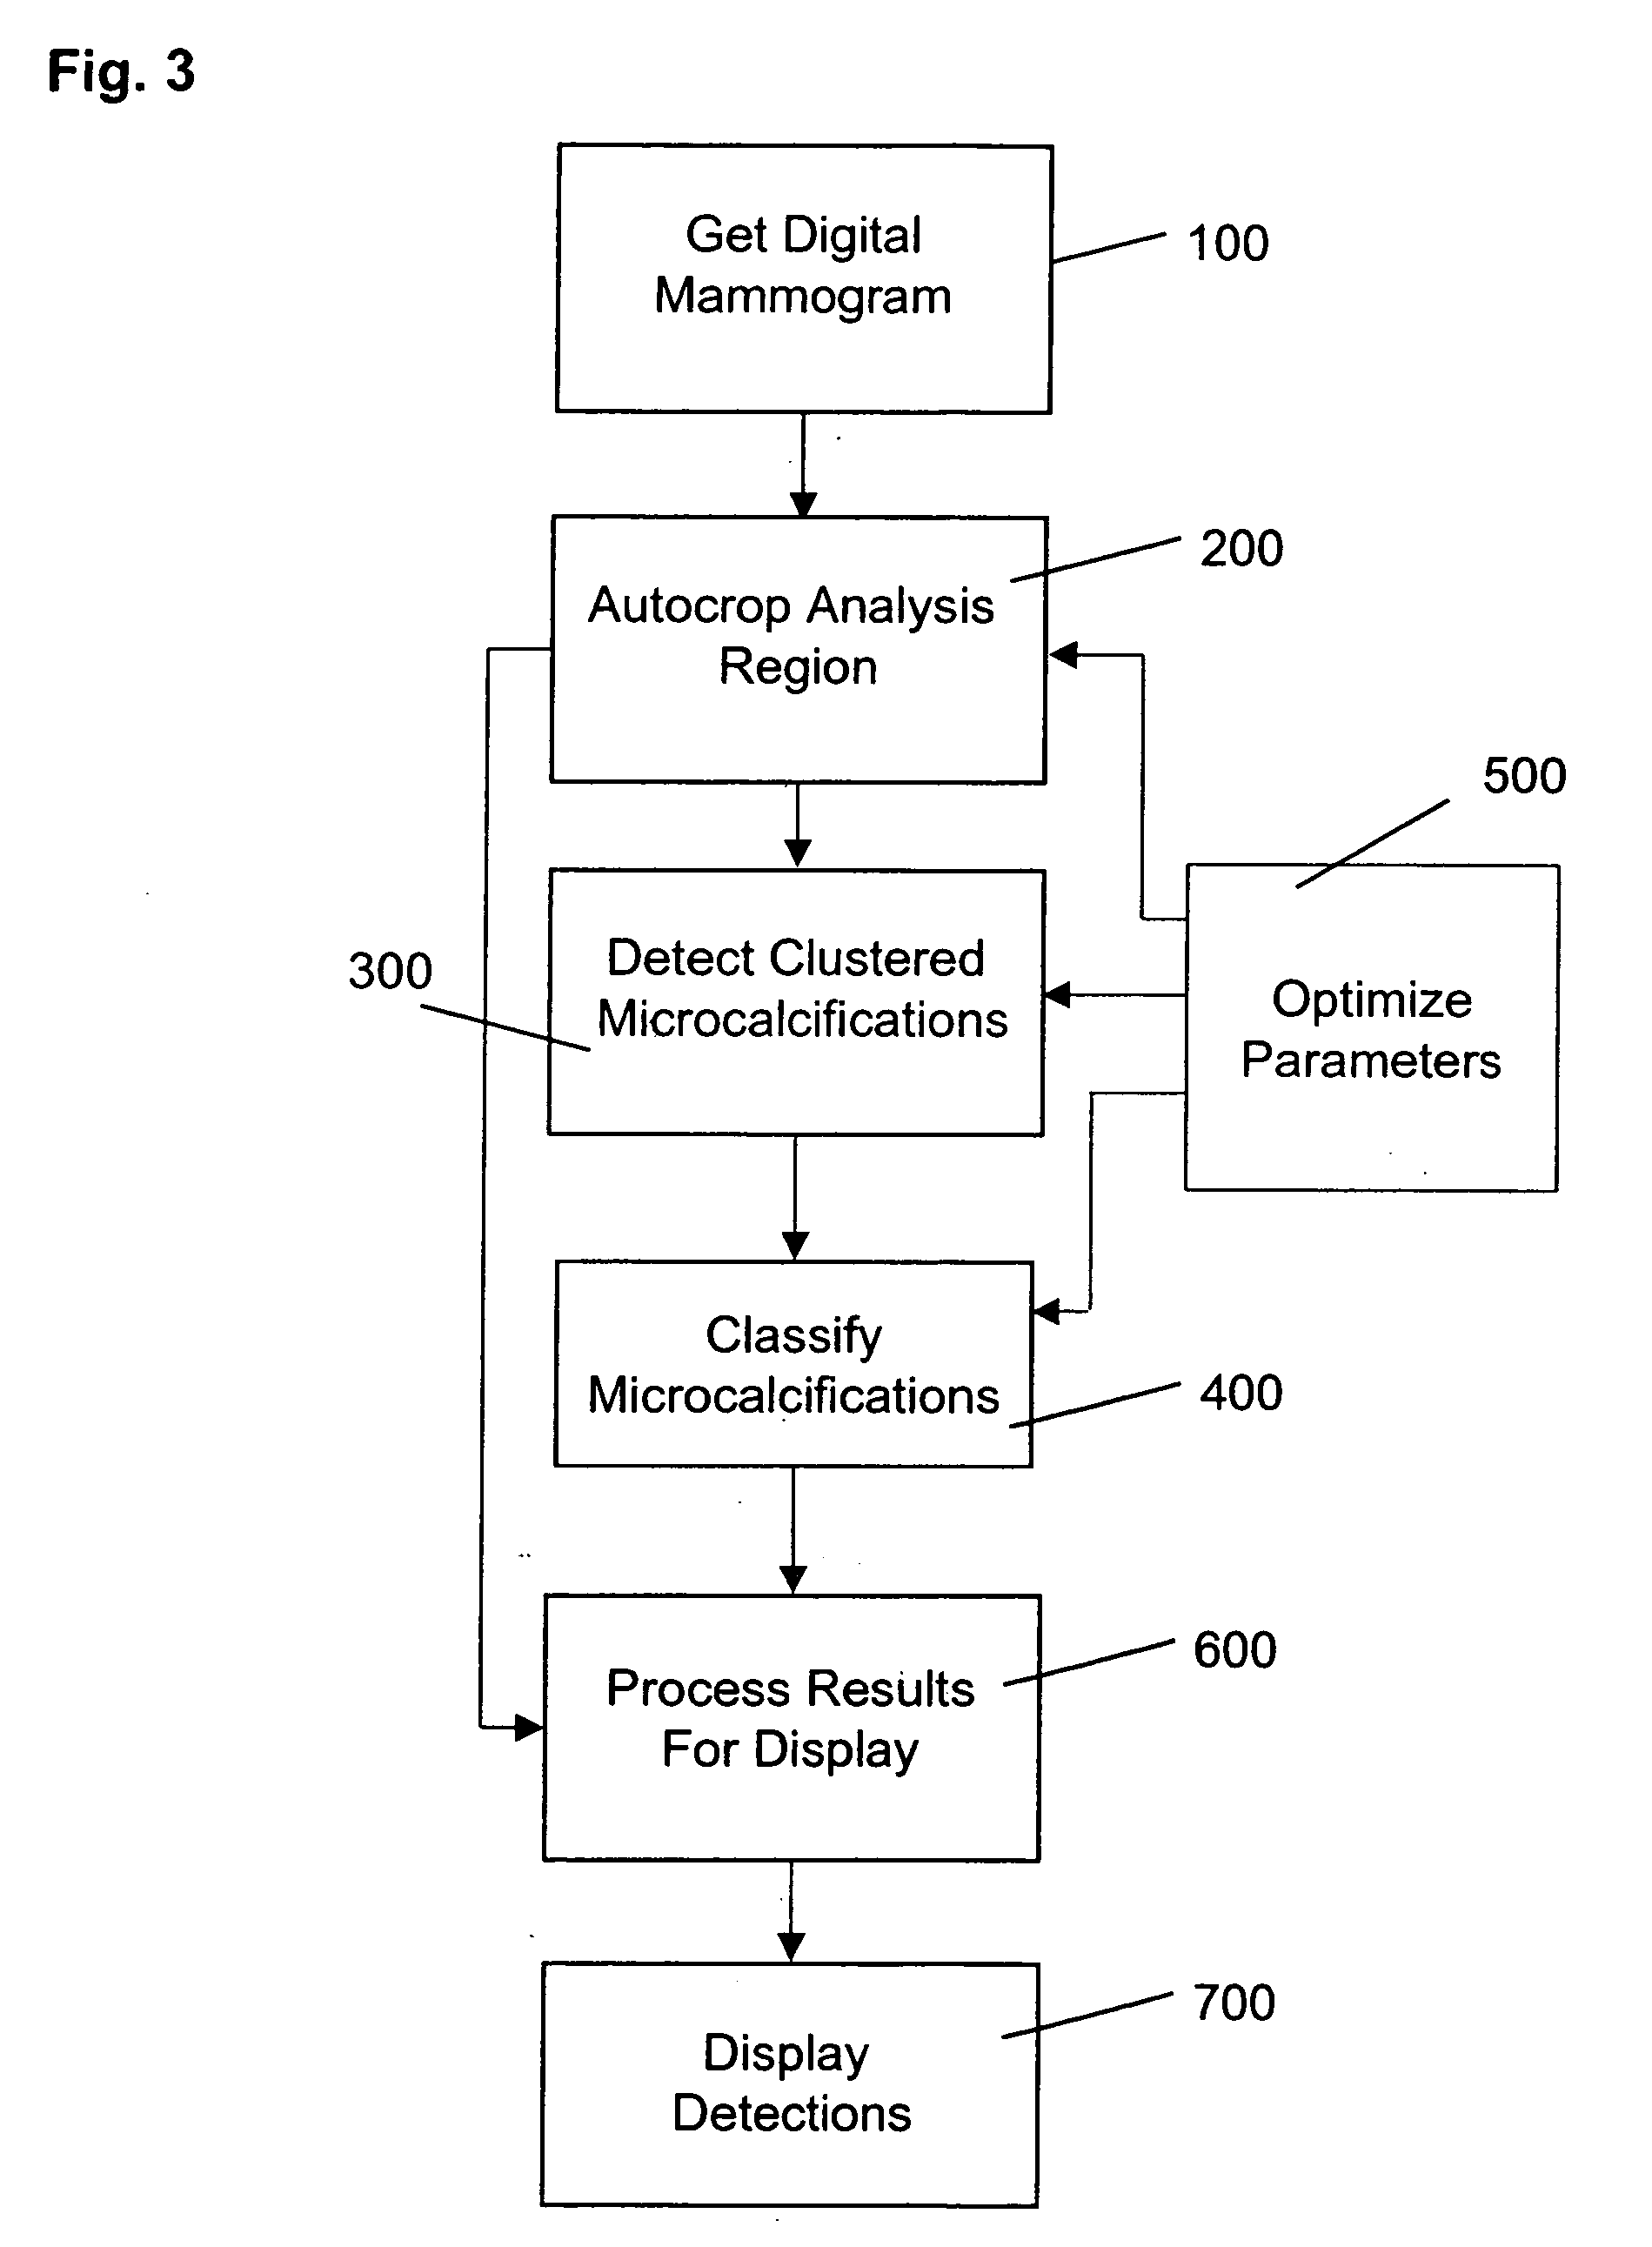 Use of computer-aided detection system outputs in clinical practice